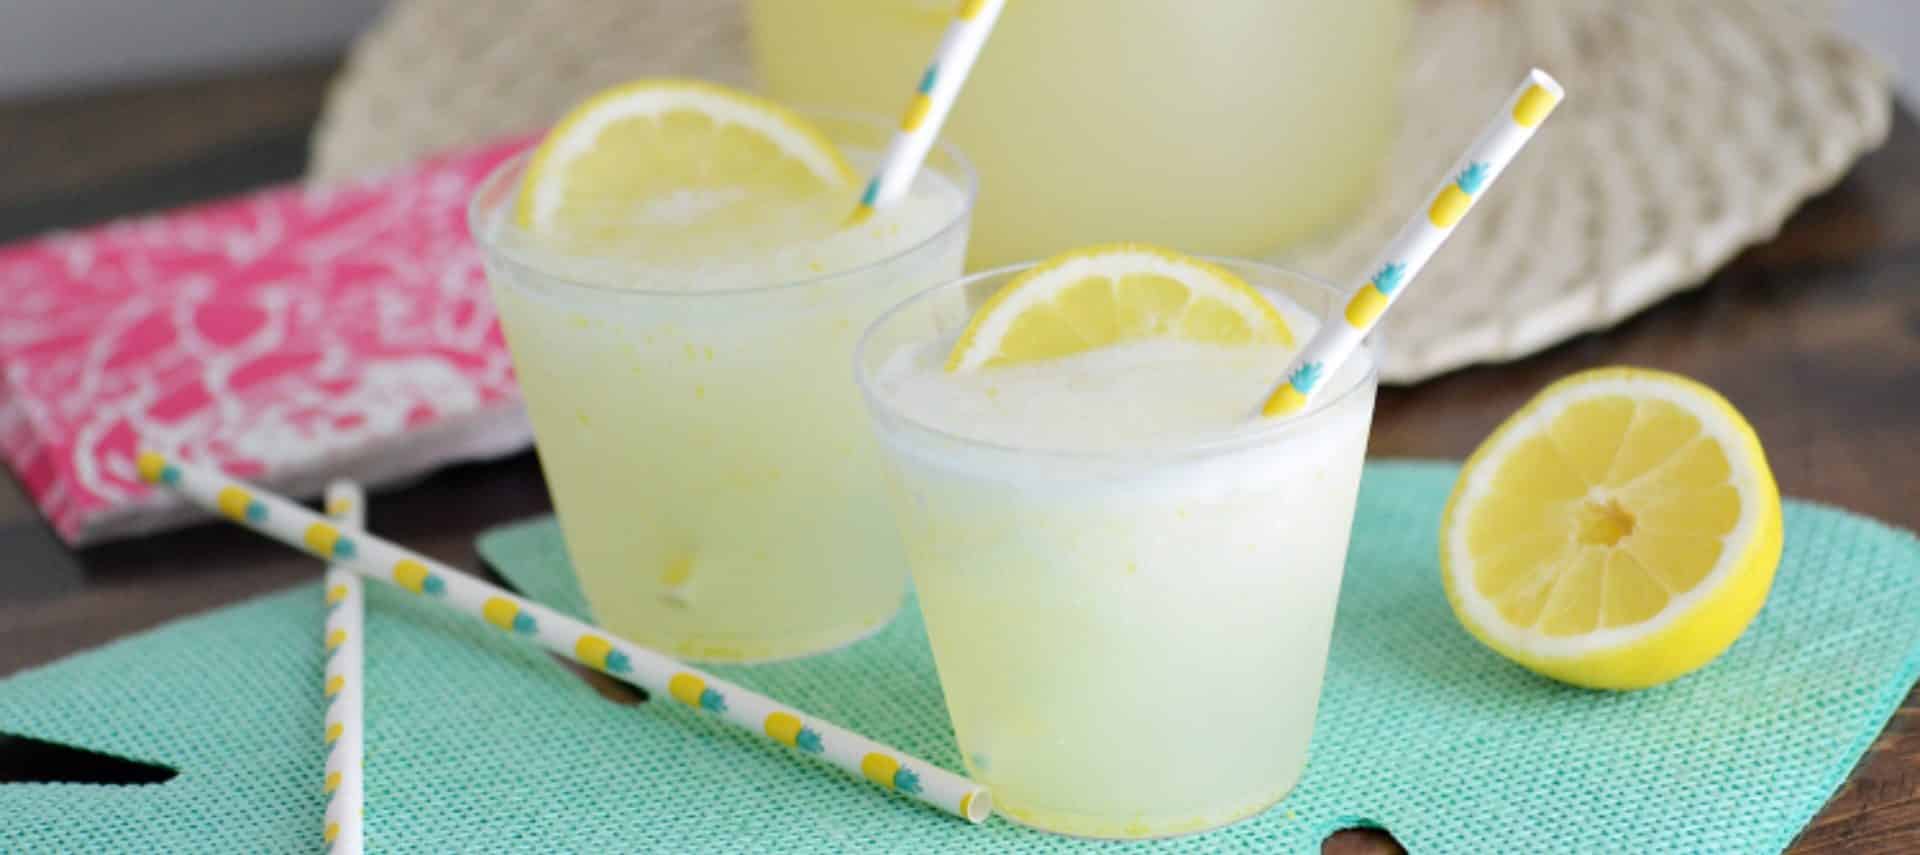 Two small clear plastic cups filled with frozen lemonade and a slice of lemon with a straw.